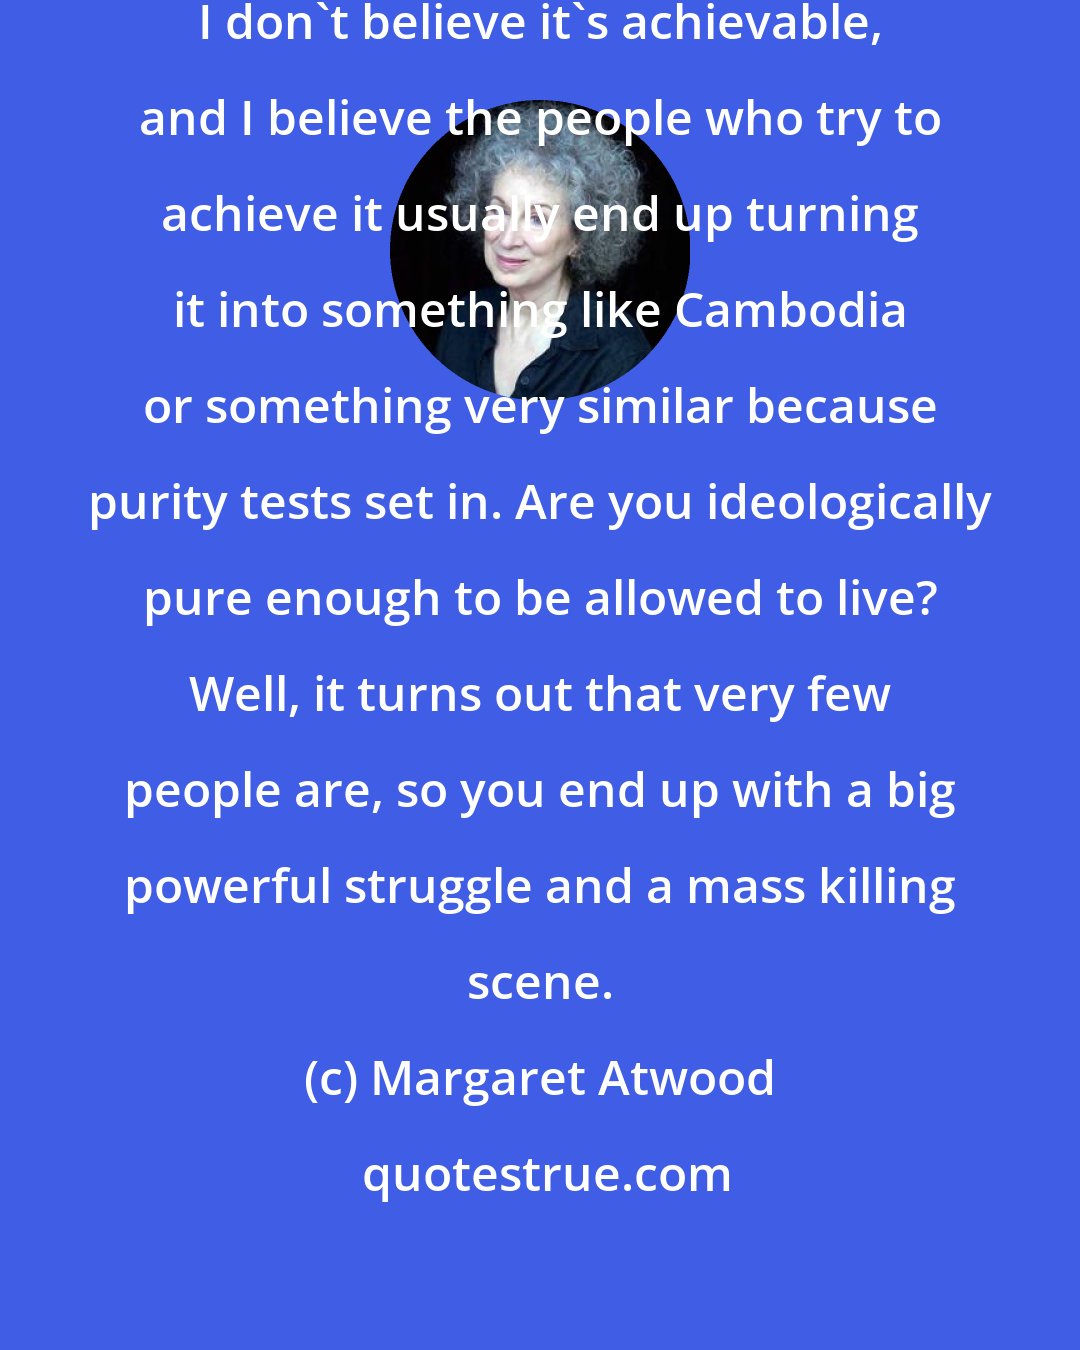 Margaret Atwood: I don't believe in a perfect world. I don't believe it's achievable, and I believe the people who try to achieve it usually end up turning it into something like Cambodia or something very similar because purity tests set in. Are you ideologically pure enough to be allowed to live? Well, it turns out that very few people are, so you end up with a big powerful struggle and a mass killing scene.